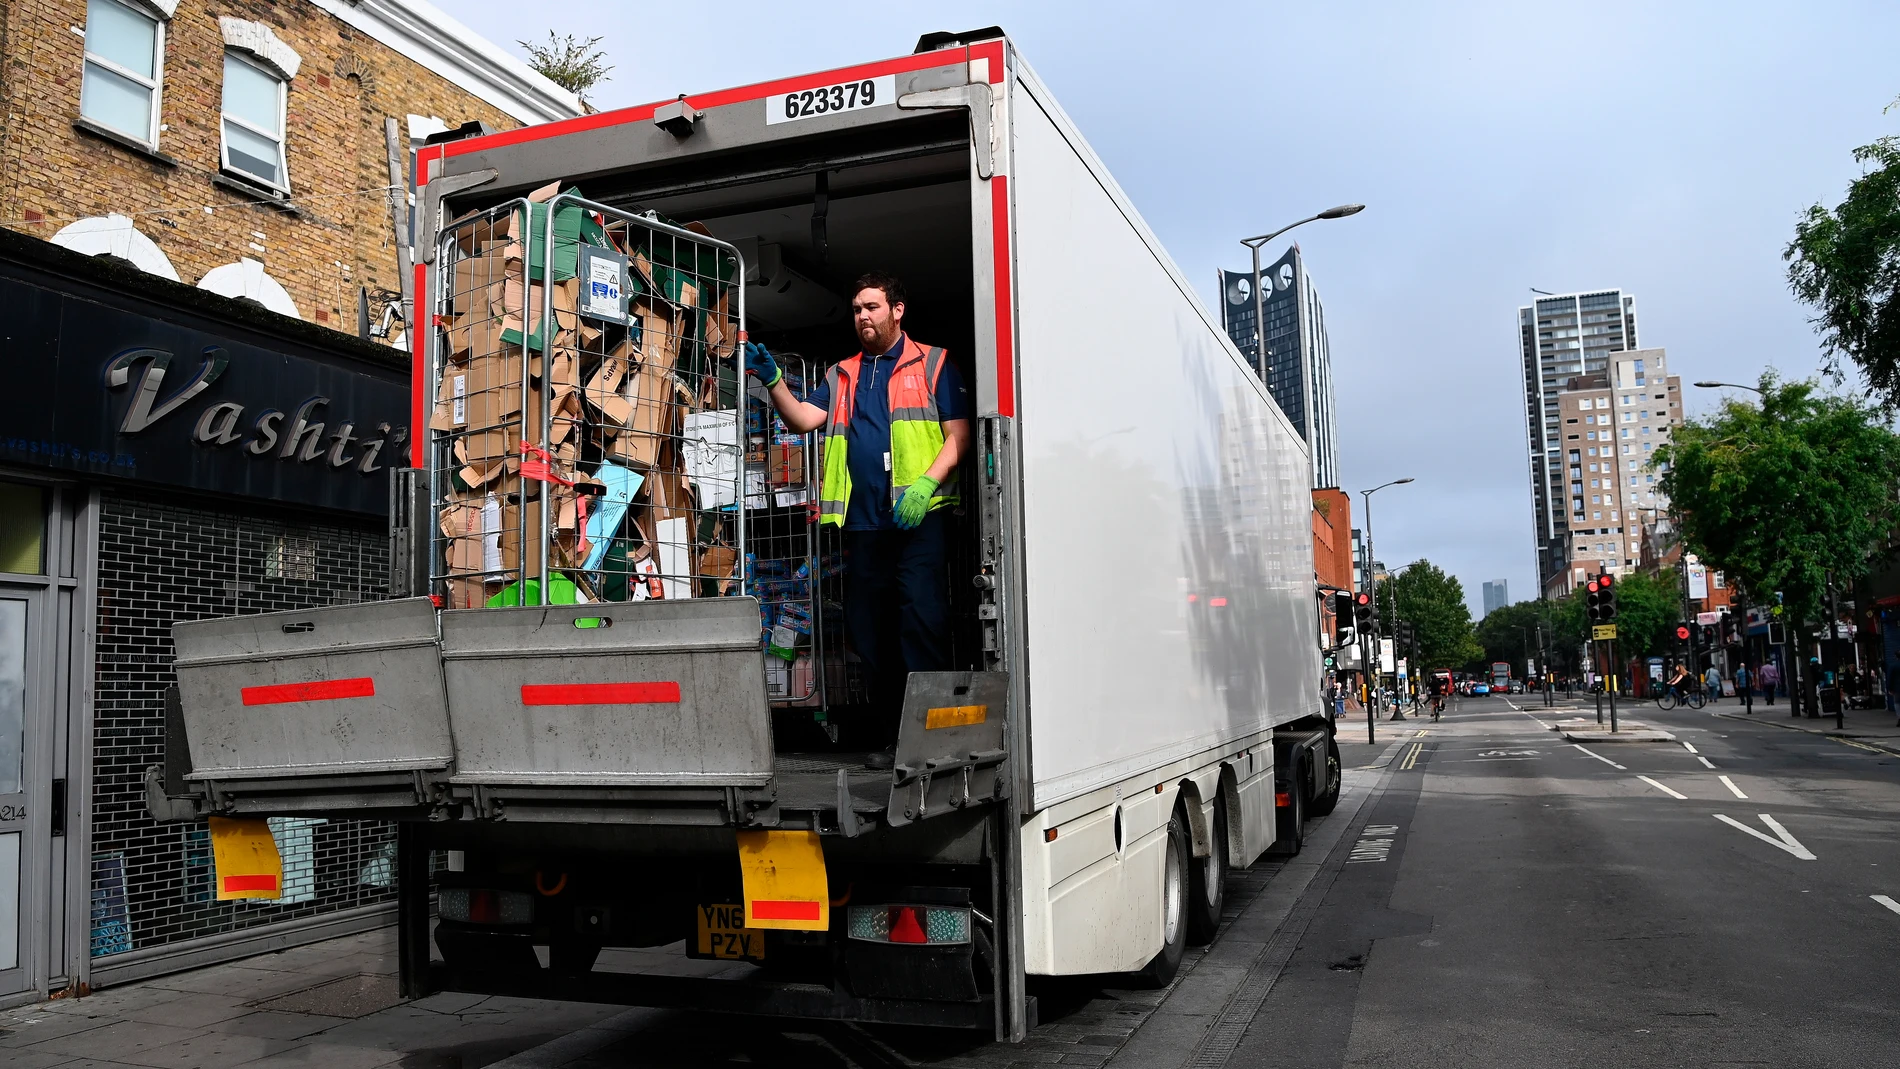 London (United Kingdom), 09/09/2021.- A Tesco delivery driver loads a lorry outside a supermarket in central London, Britain, 09 September 2021. A shortage of lorry drivers has left supermarkets and restaurants short of produce across the UK. Brexit and the Covid pandemic has meant there aren't enough lorry drivers to meet the demand. (Reino Unido, Londres) EFE/EPA/ANDY RAIN